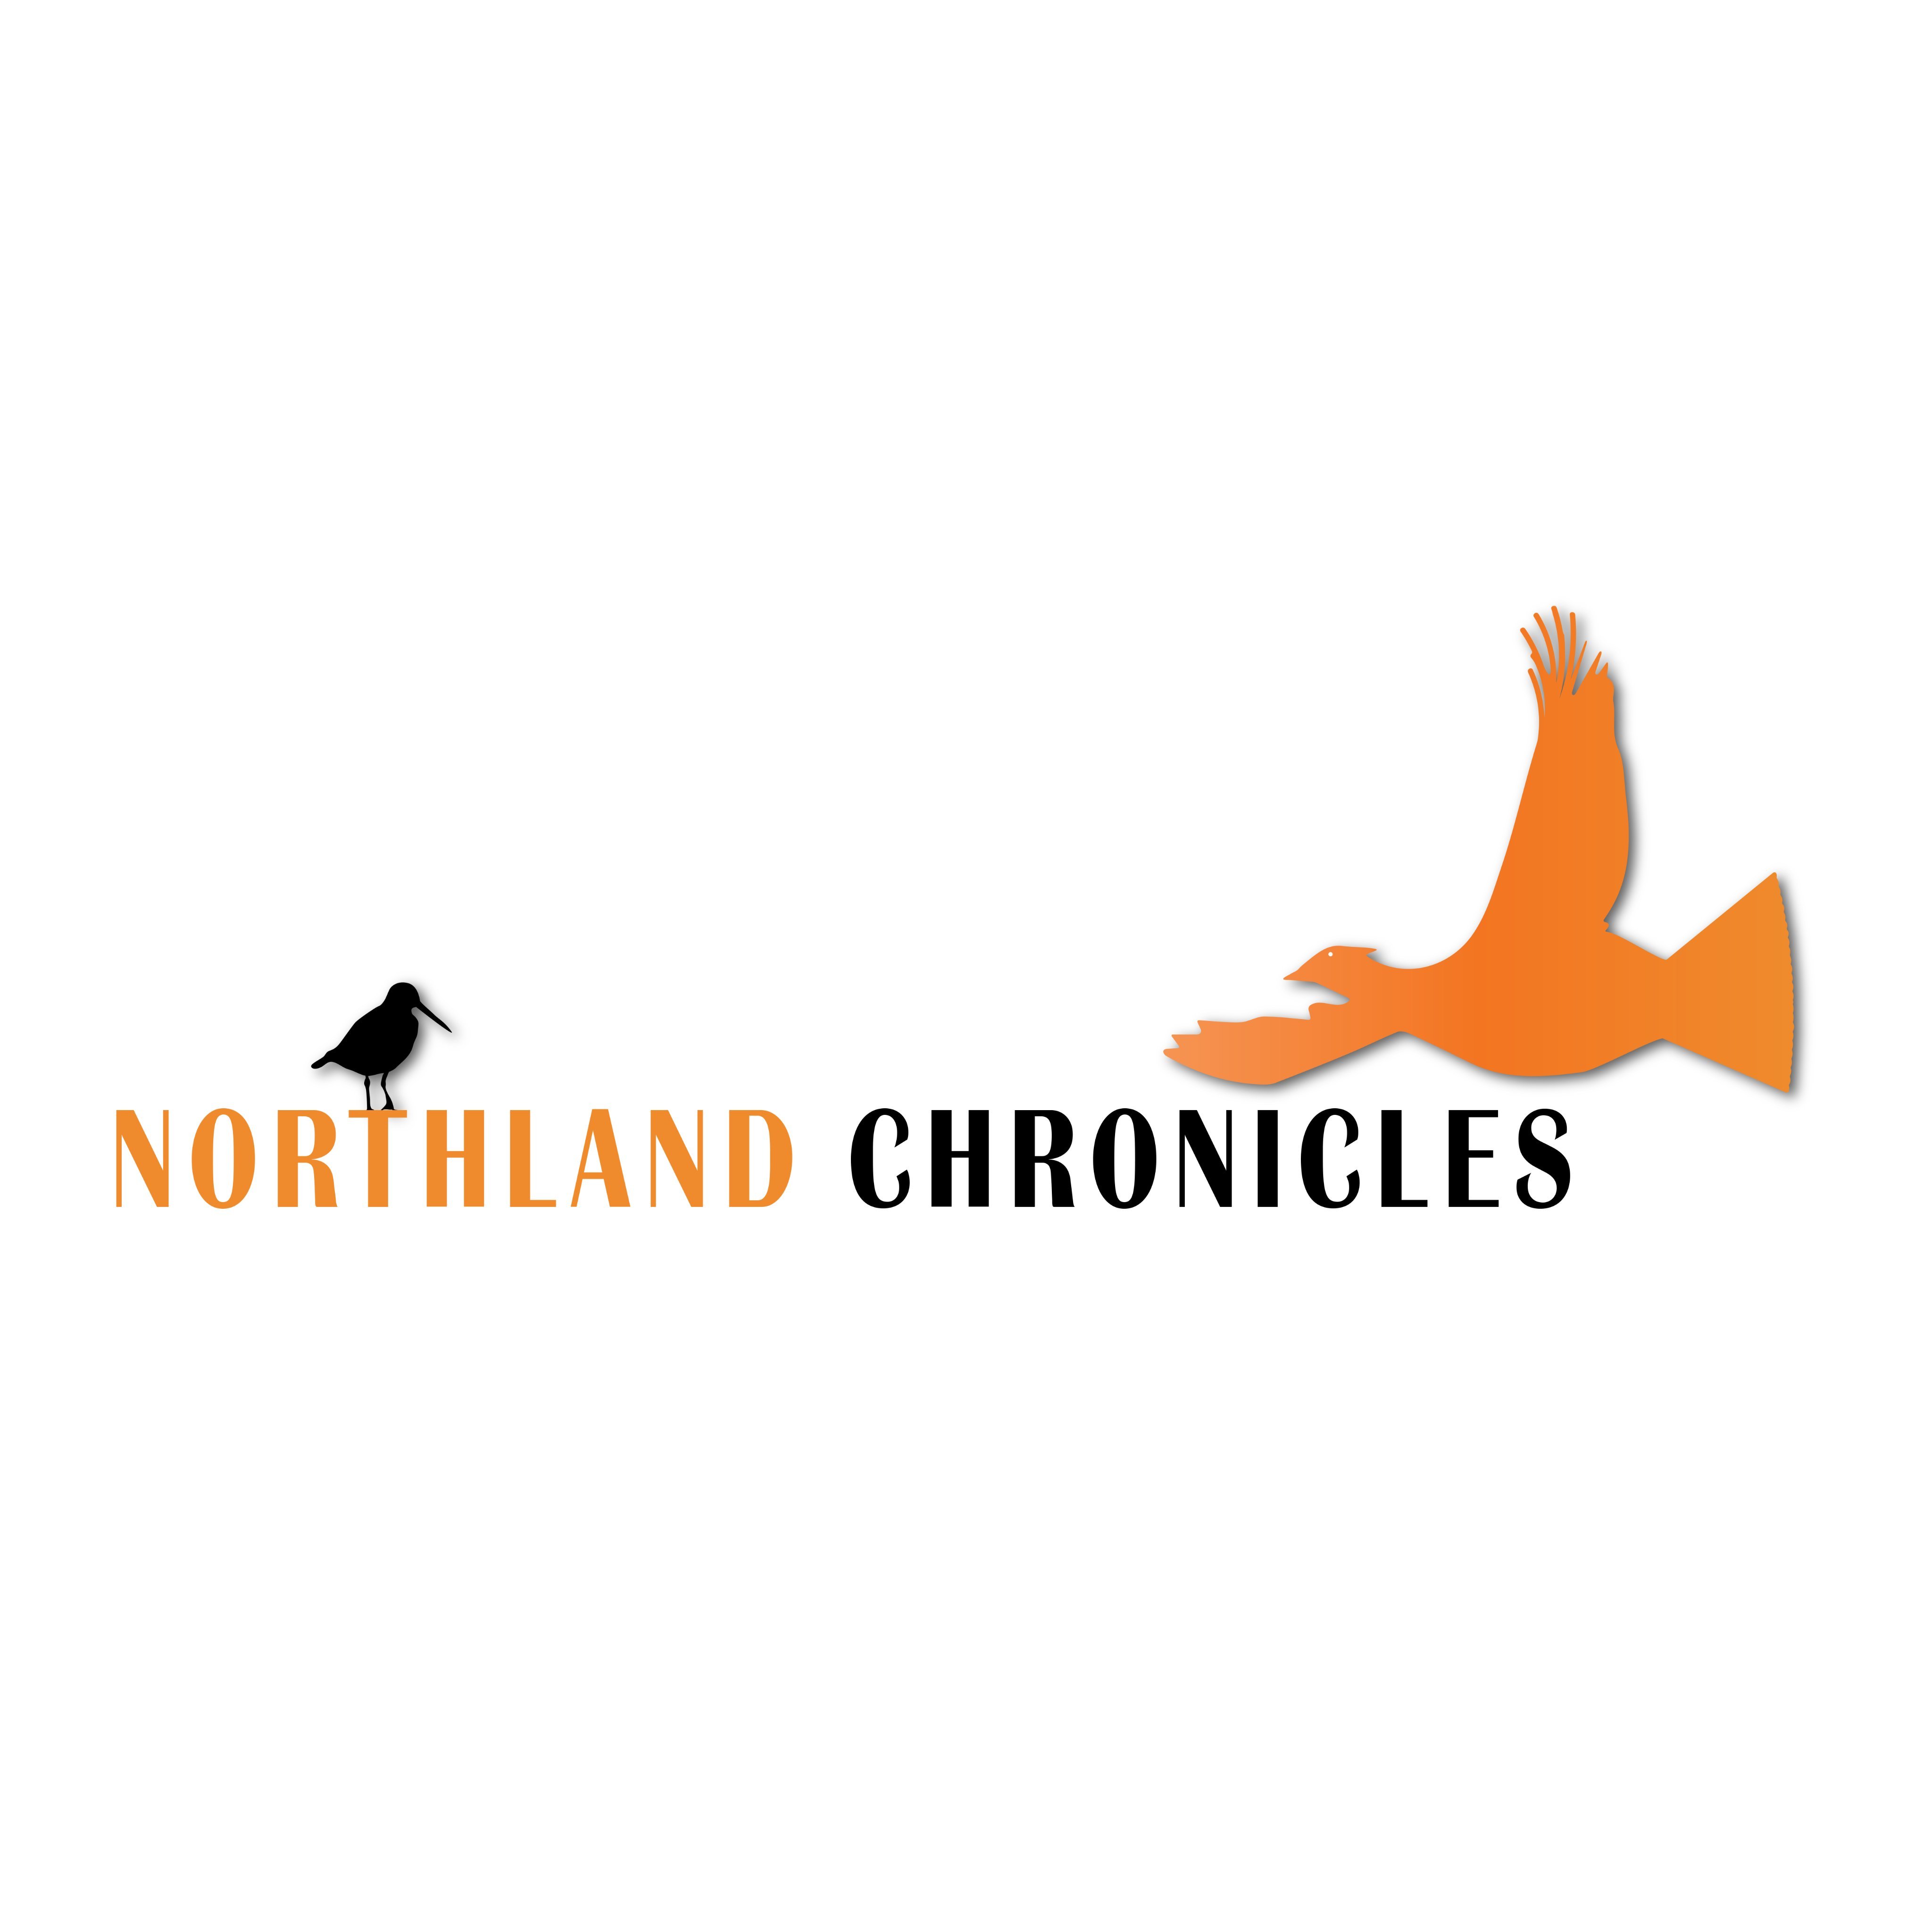 Official Twitter for the Northland Chronicles | Tall Tales | Hunting Stories | Blog | Podcast | #NorthlandChronicles | Inquiries: info@northlandchronicles.com